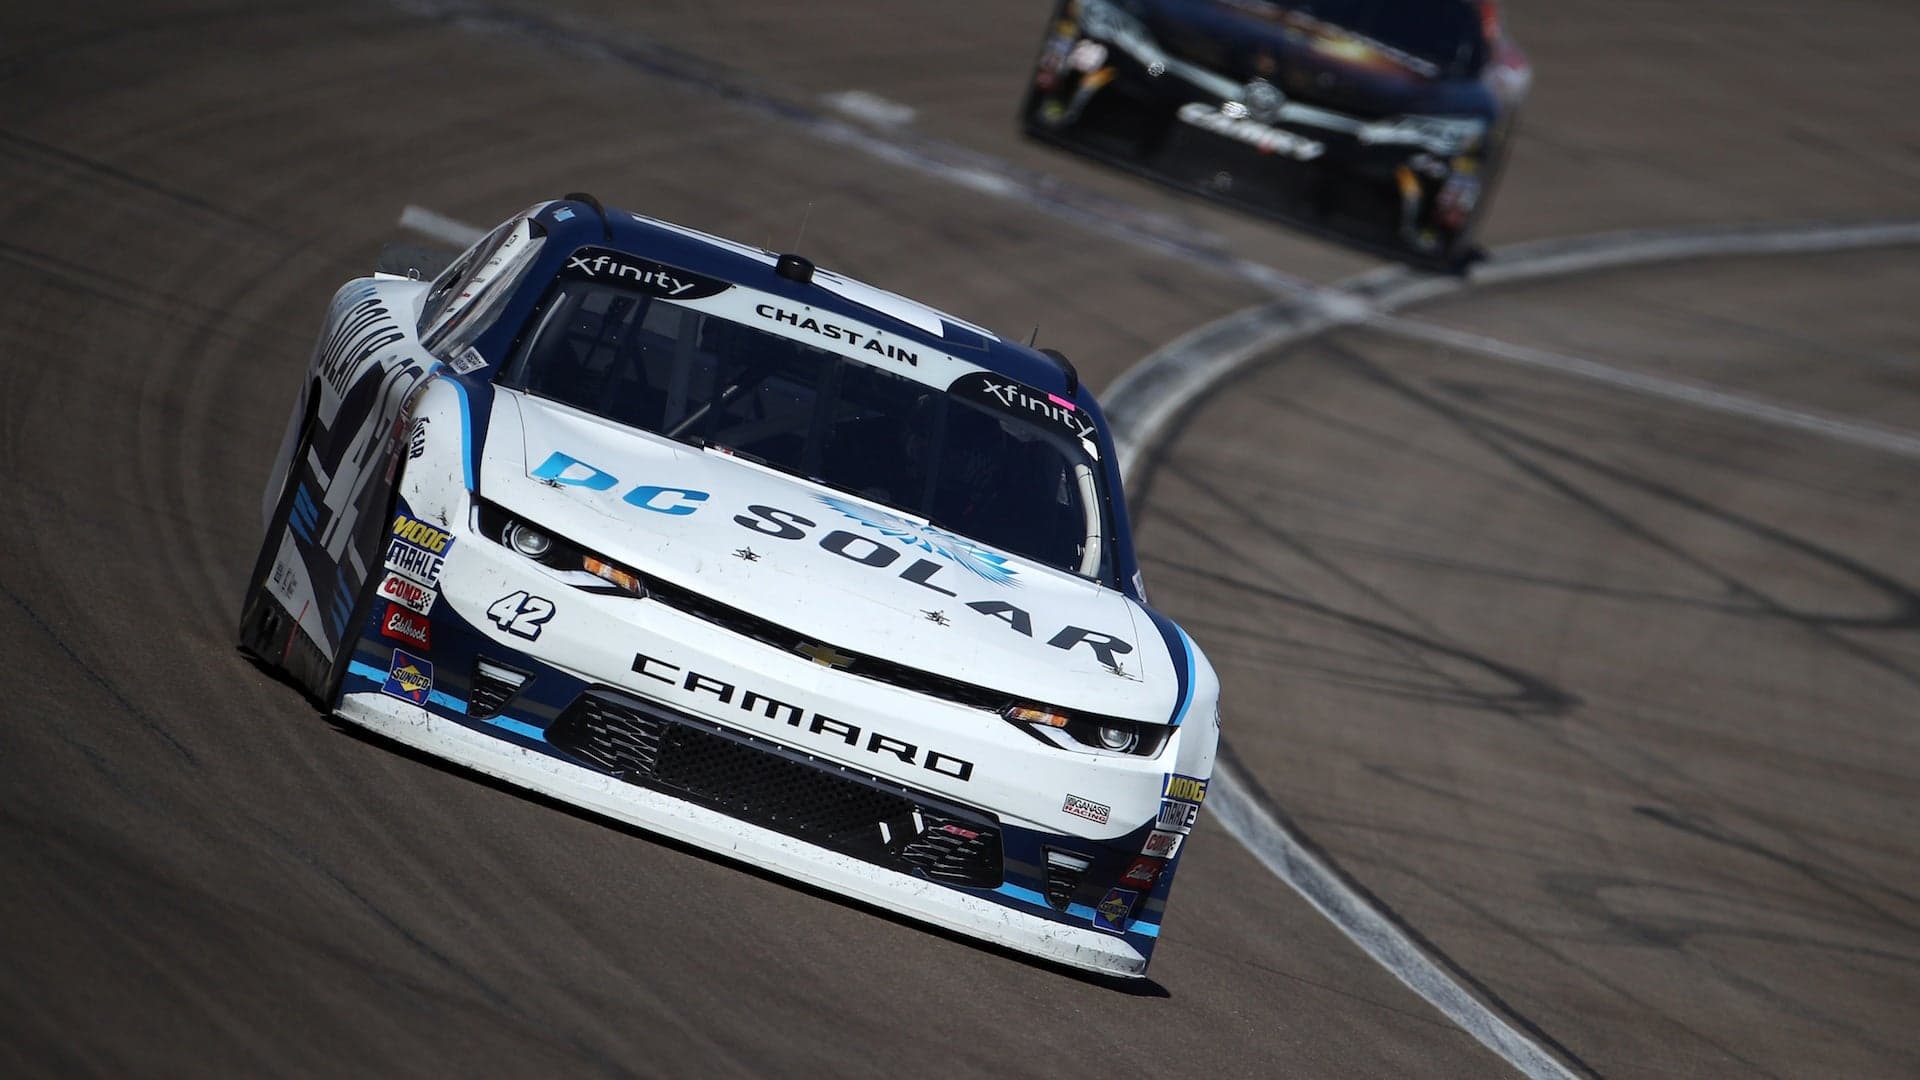 Chip Ganassi Racing Puts Ross Chastain in NASCAR Xfinity Series Car for Entire 2019 Season